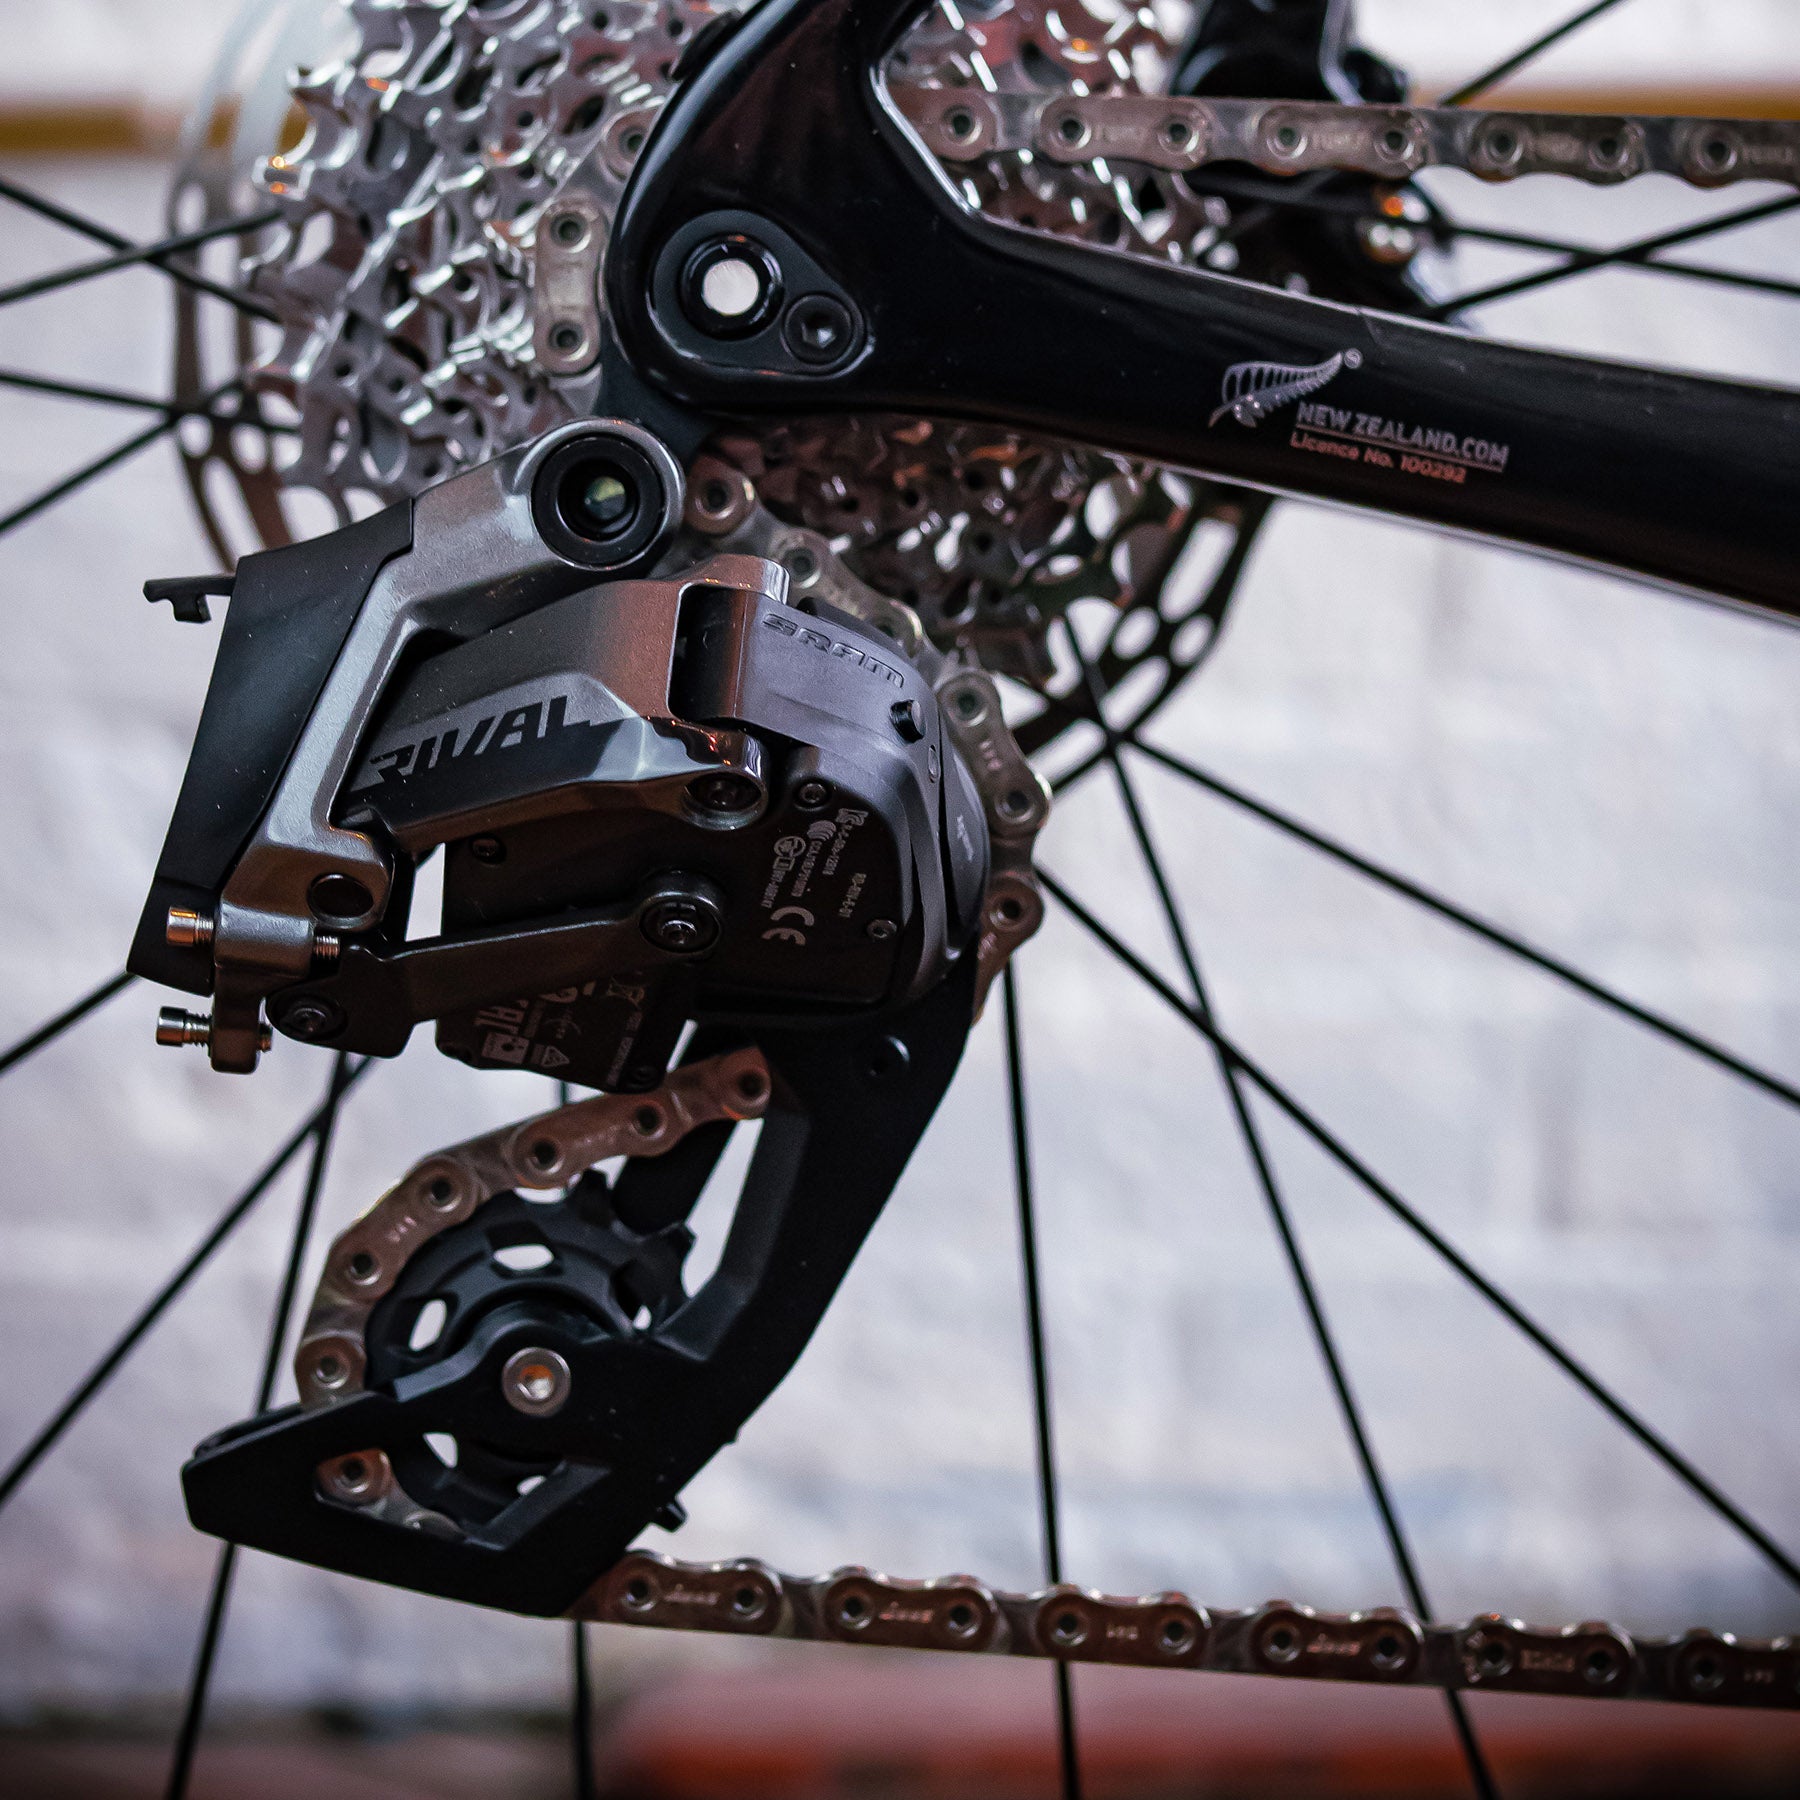 Image features a side angle shot of the gear shaft on the Chapter 2 TOA bike